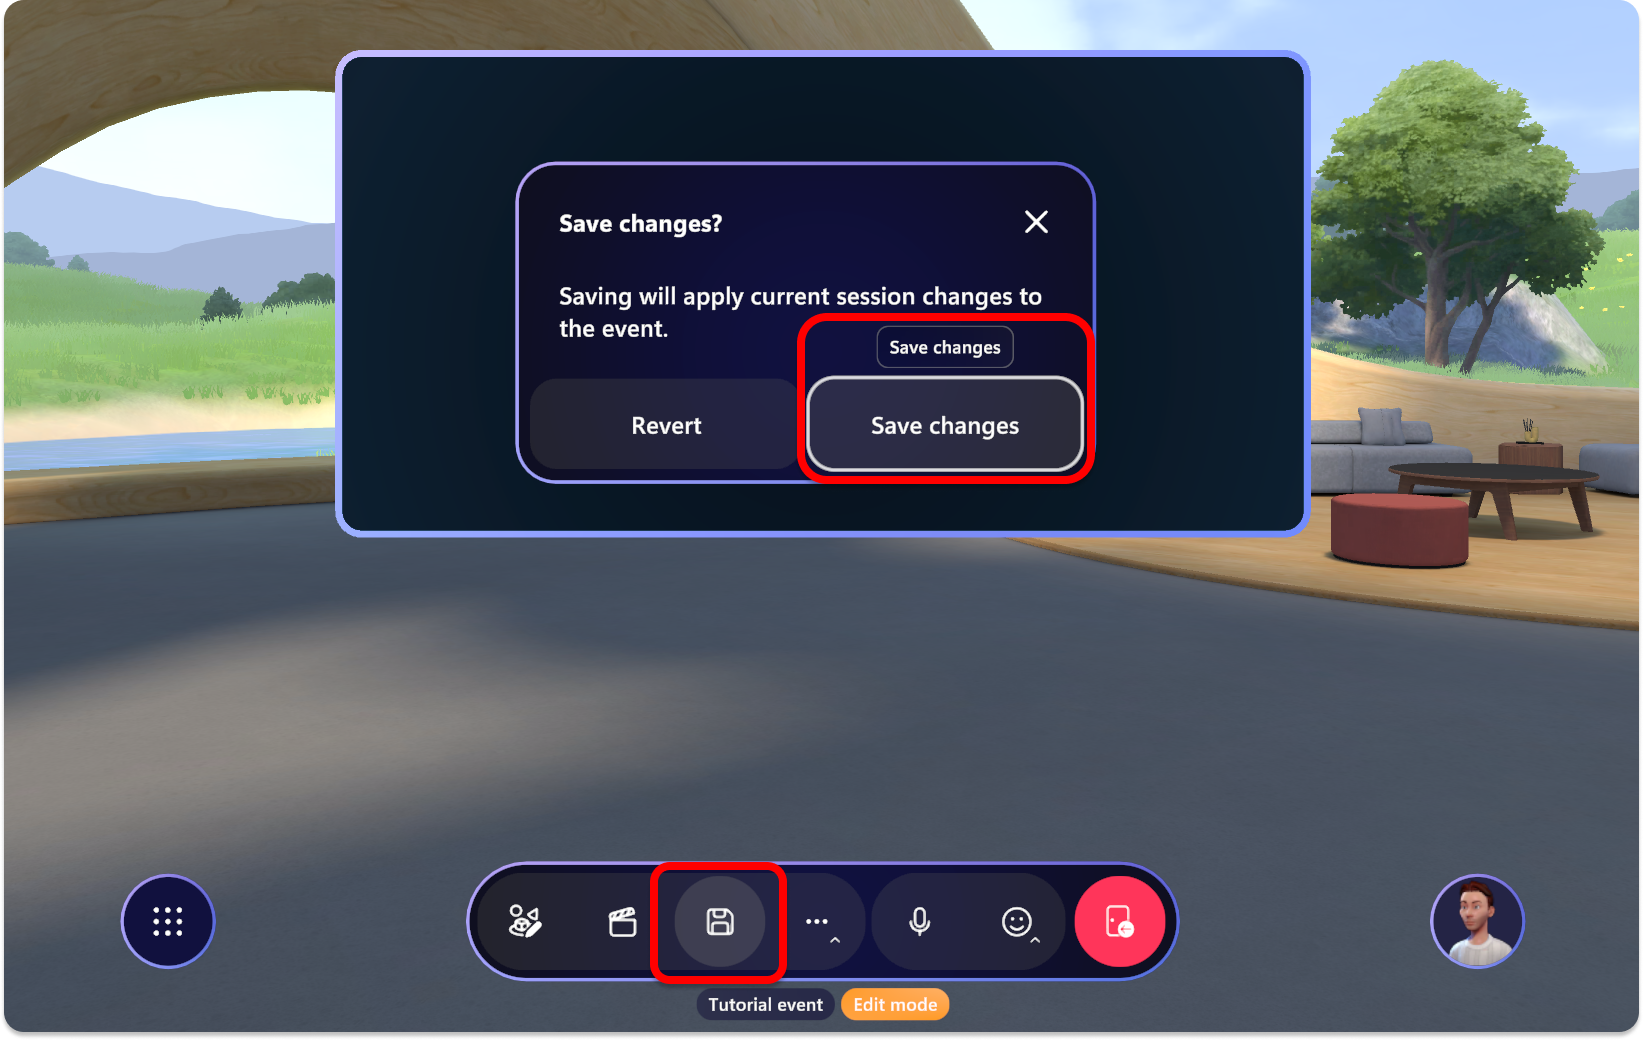 Screenshot of Mesh app showing save changes dialogue after customizing.